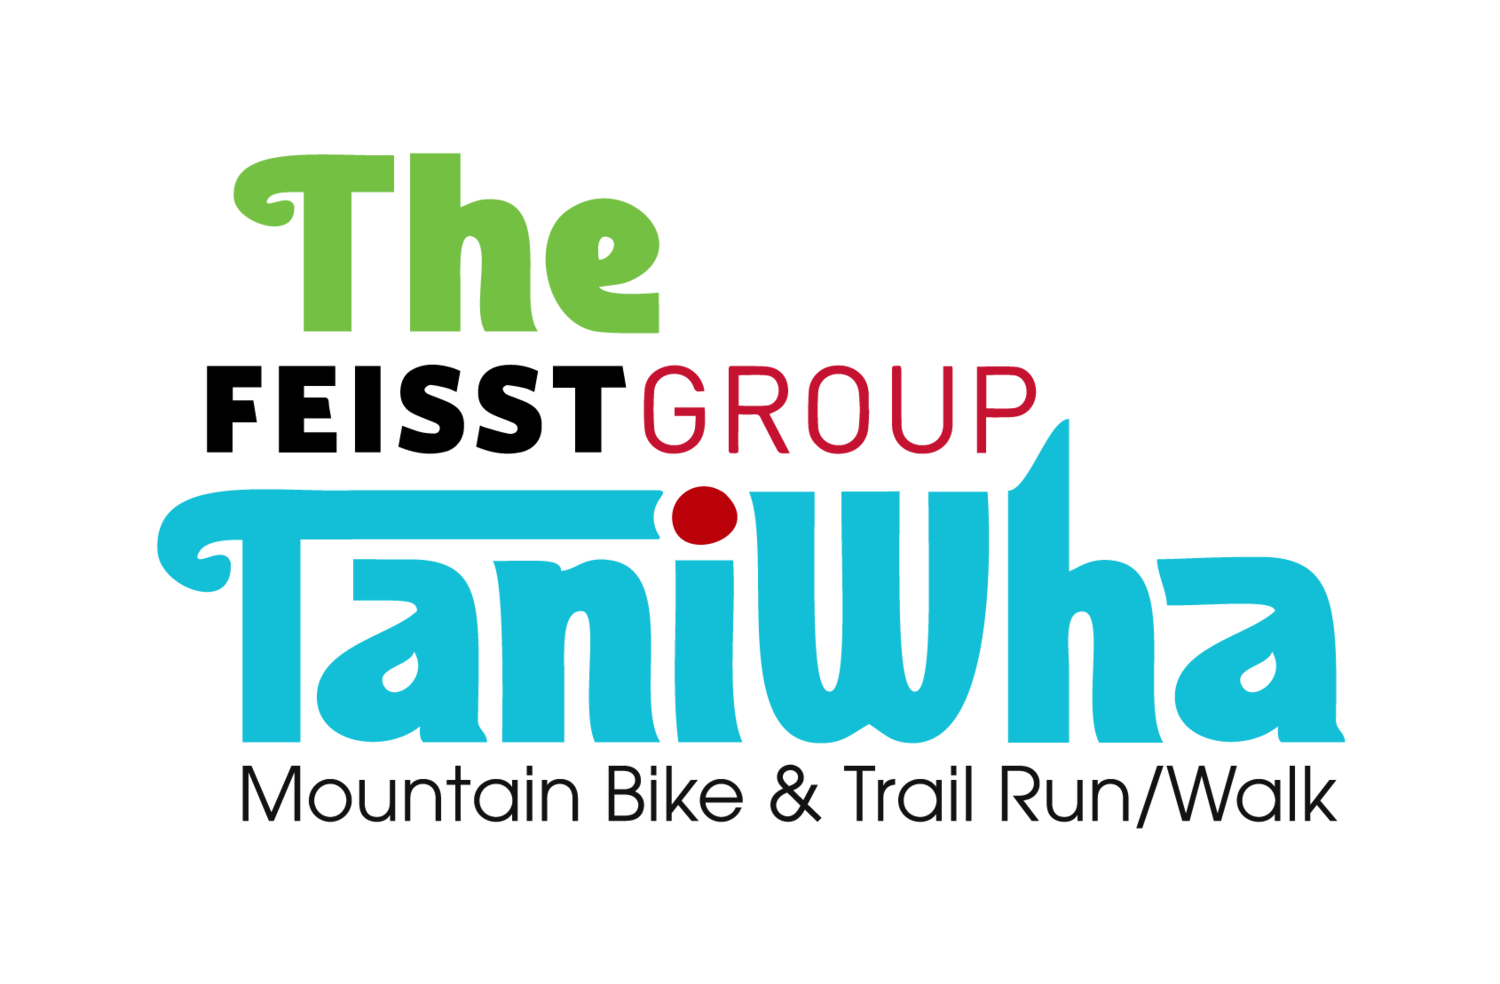 The Taniwha